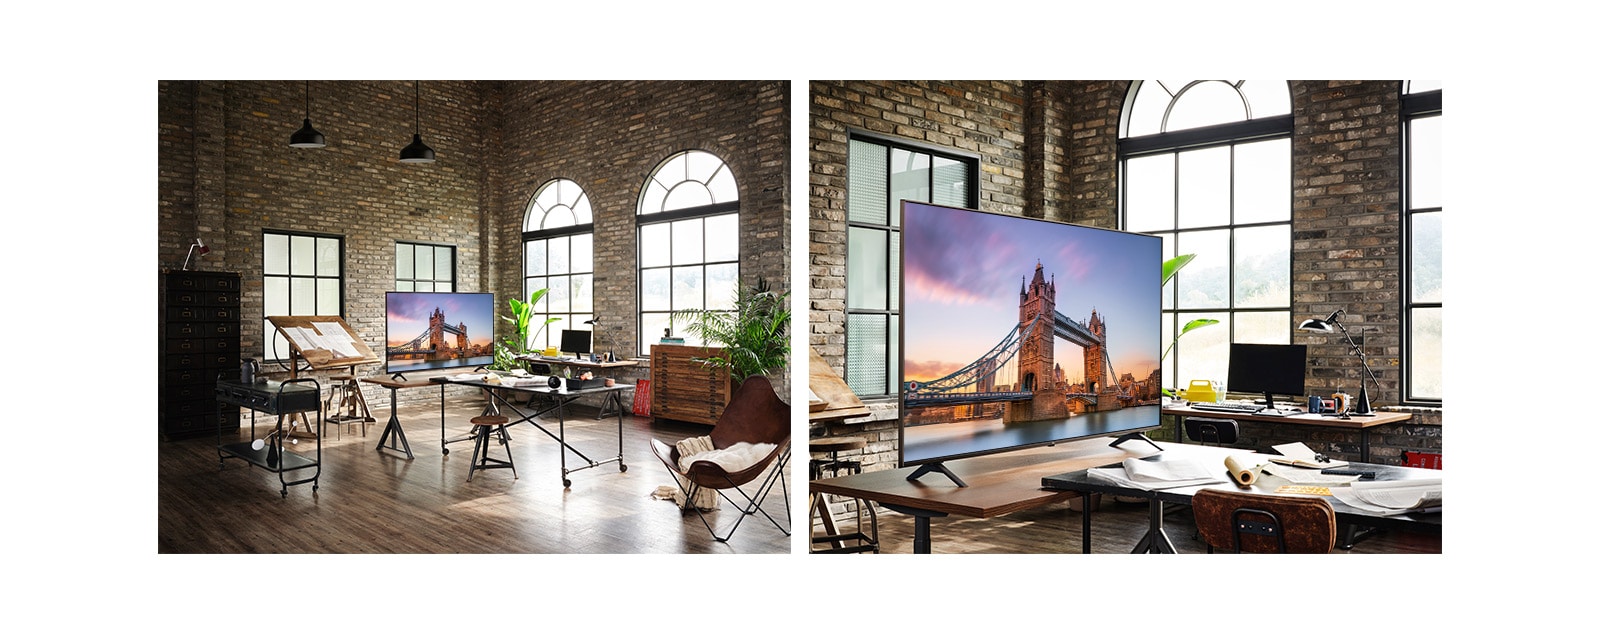 There is a TV showing a picture of London Bridge in an old fashioned working room. Close-up of a TV showing a picture of London Bridge on a table in an old-fashioned workroom.